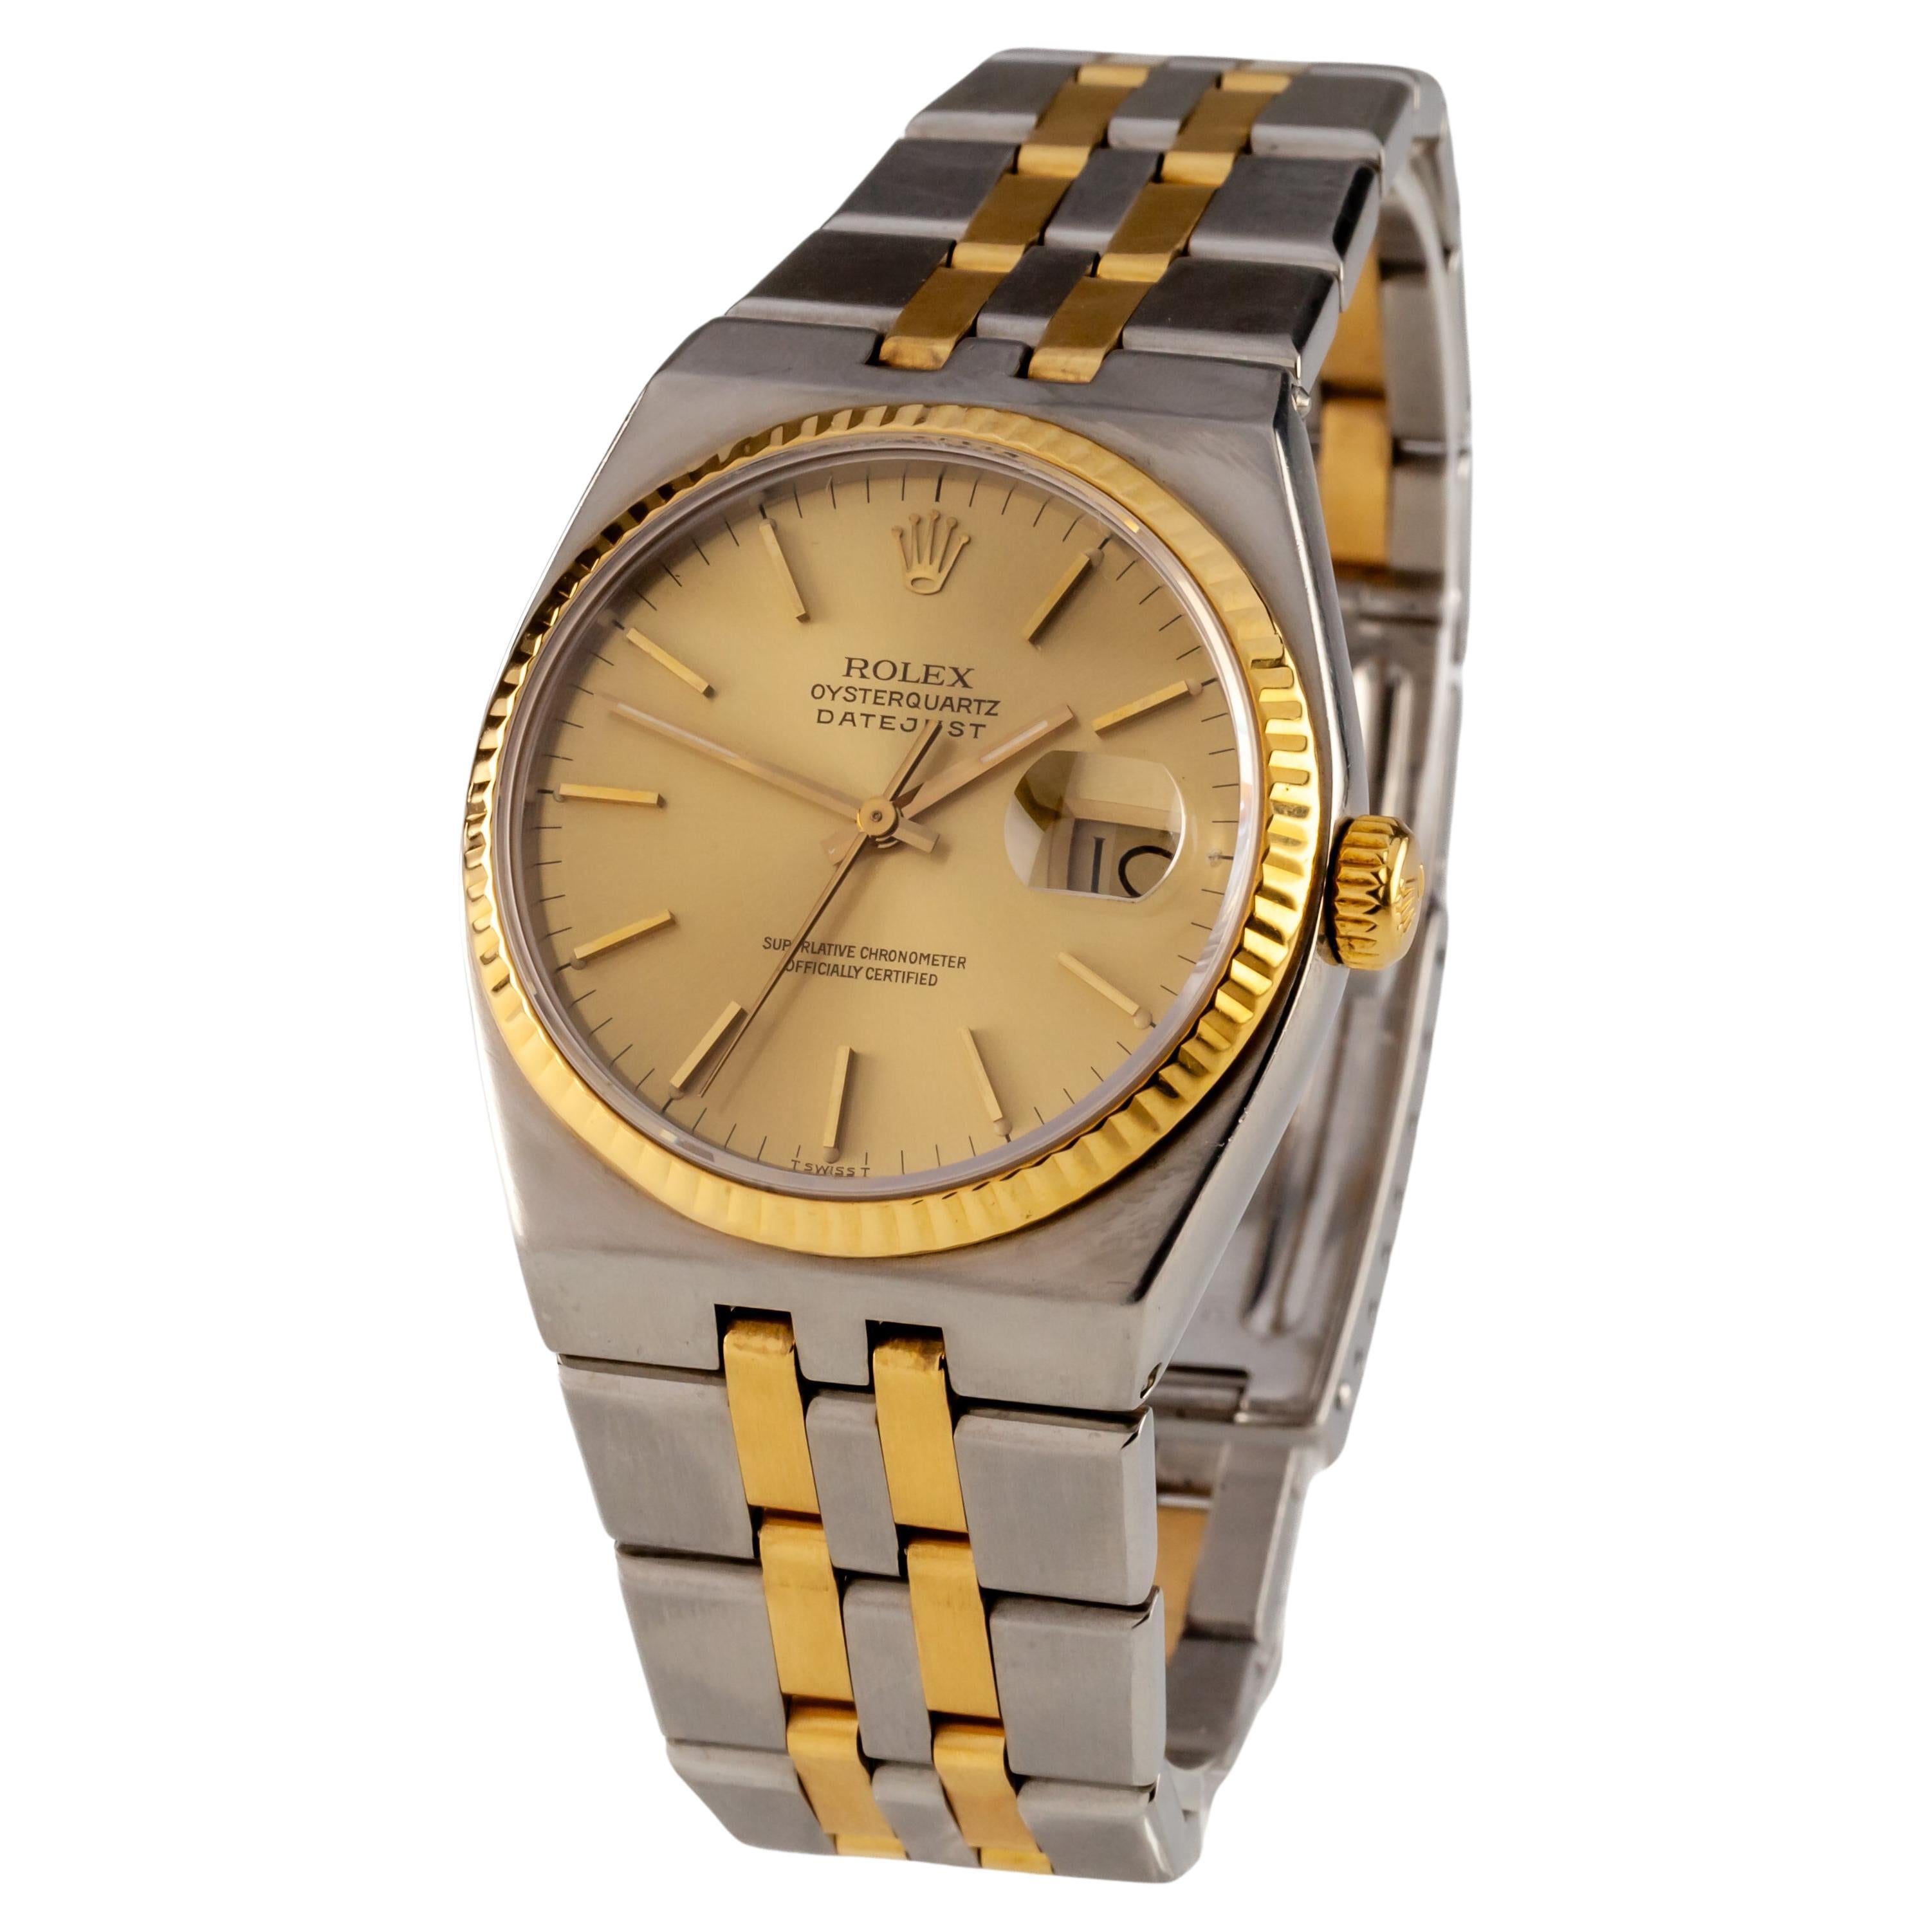 Rolex Two Tone Oysterquartz Men's Watch w/ Gold Dial 17013 1986 FULL LINKS For Sale